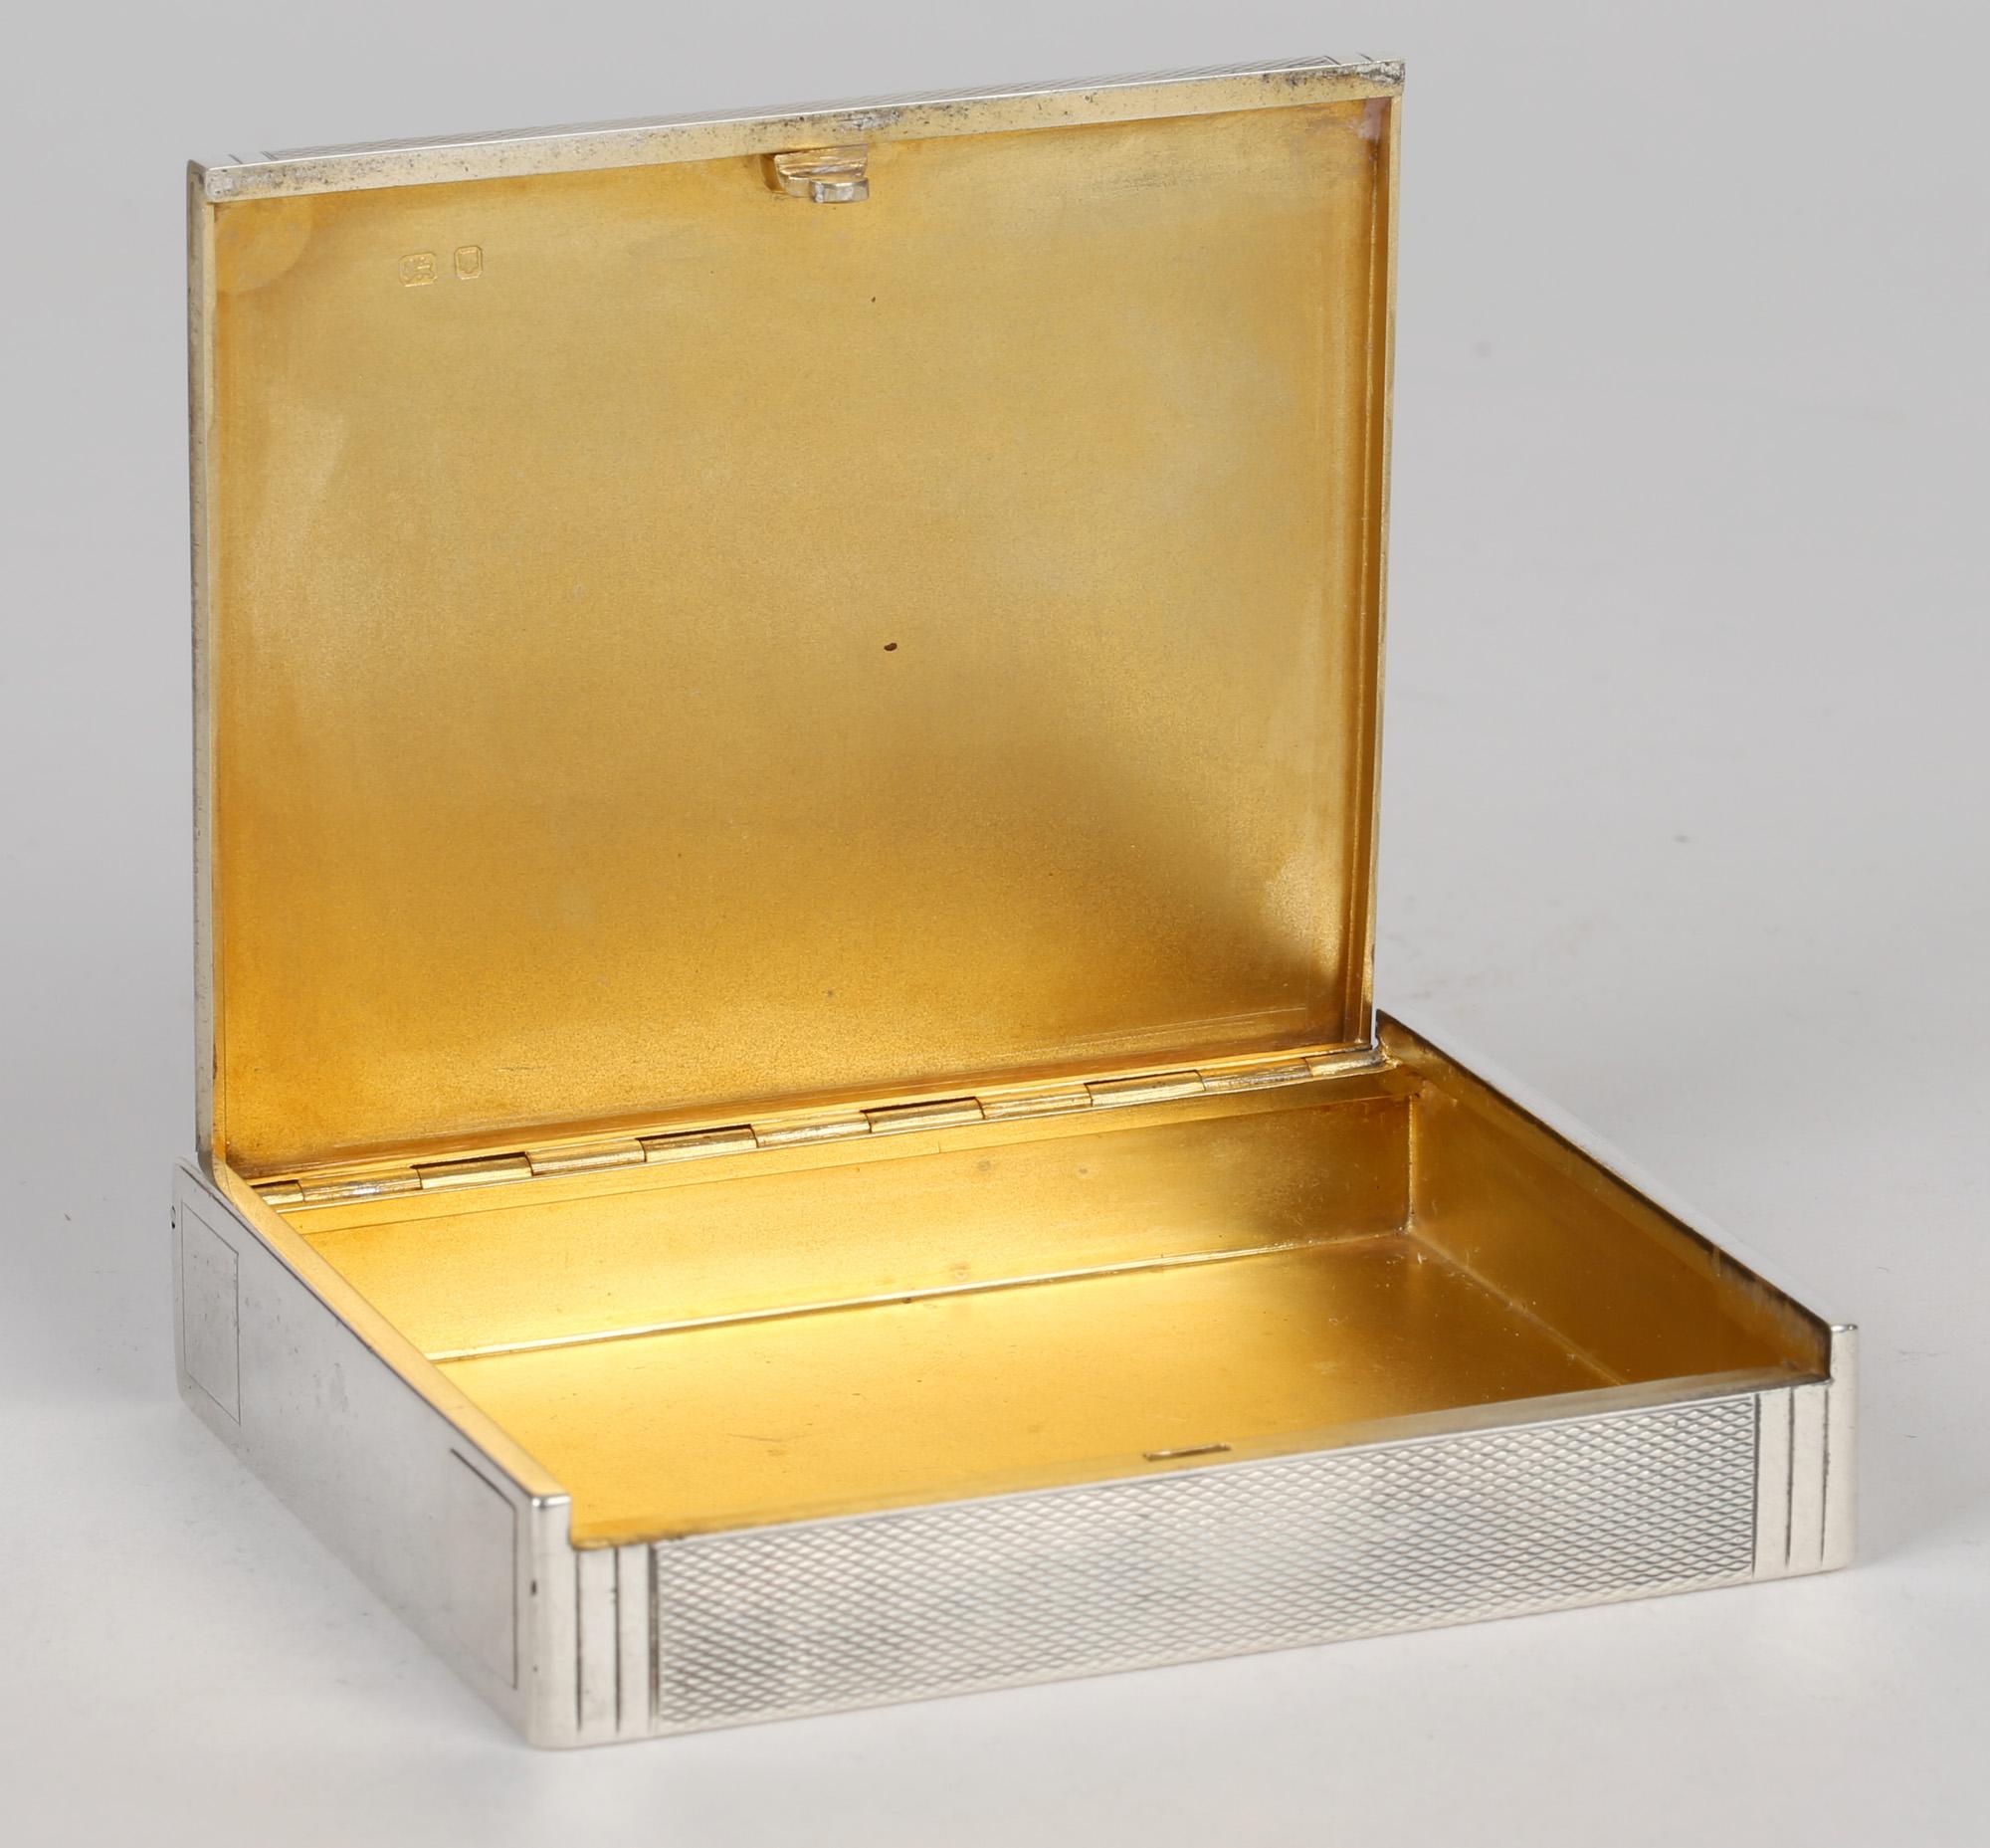 Machine-Made Cartier London Art Deco Silver Cigarette or Card Case with Machined Patterning